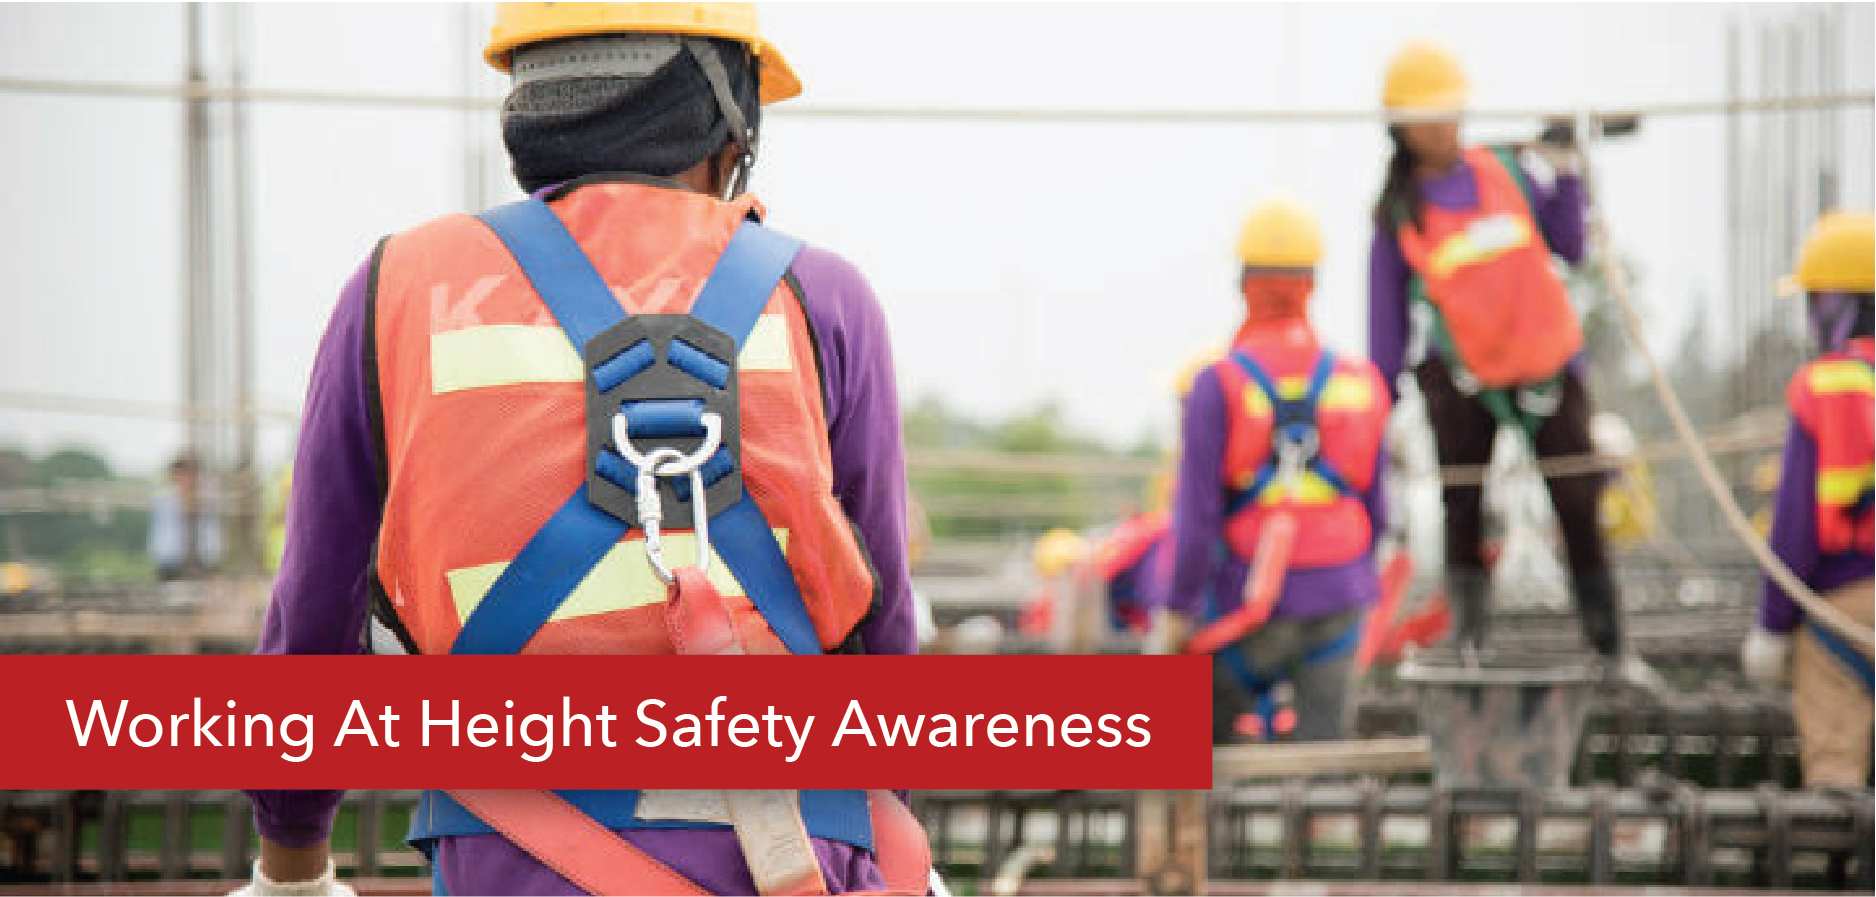 Work at Height Safety Awareness